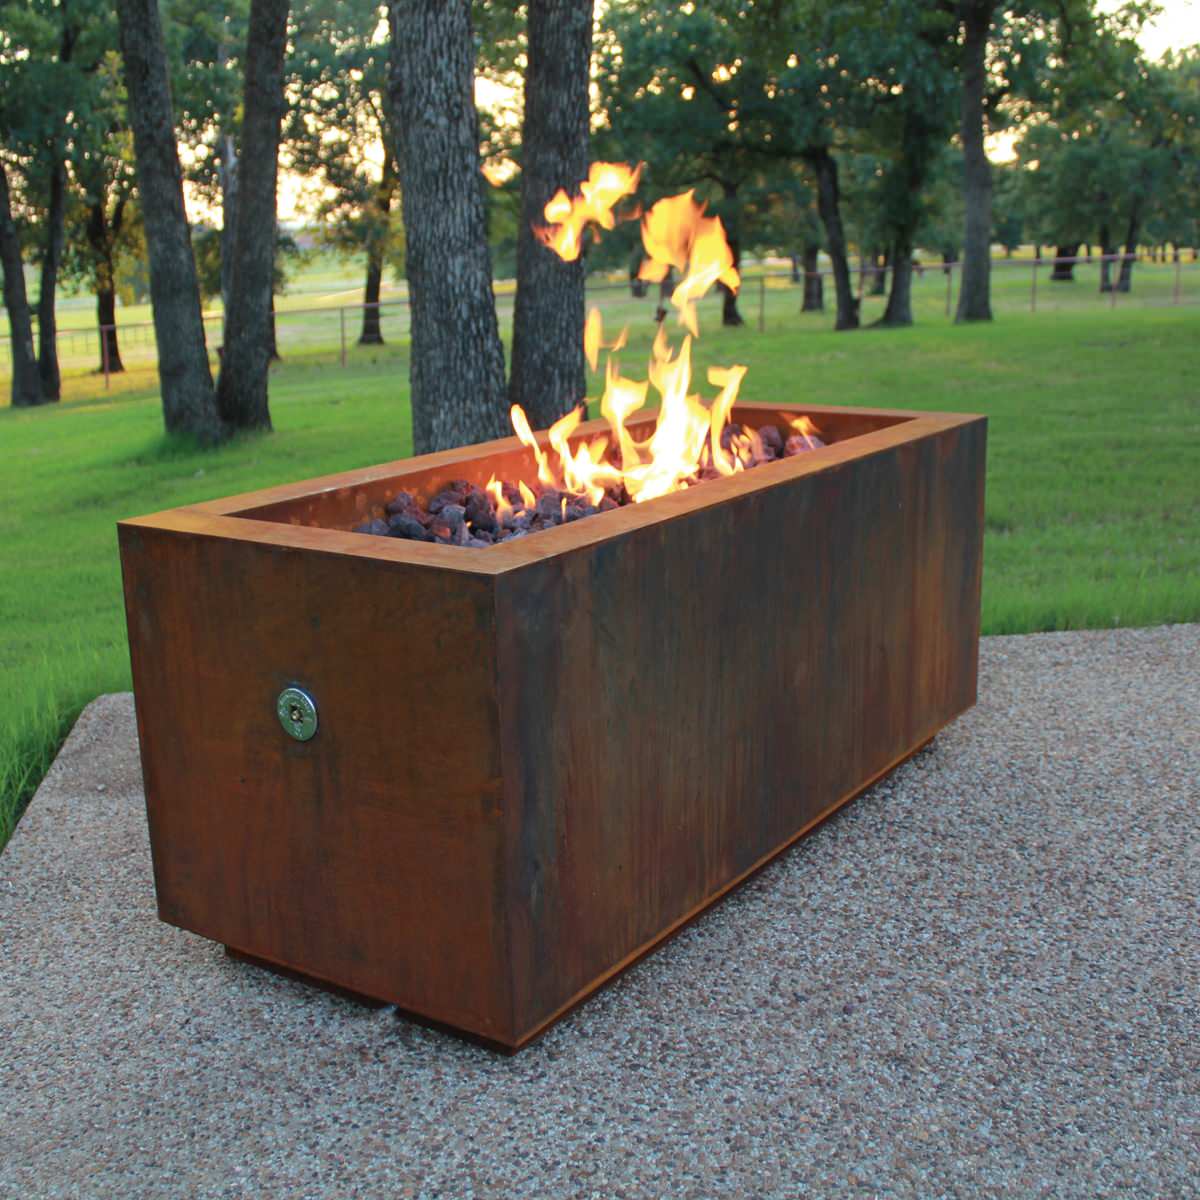 Propane Tank Fire Pit Ideas, How To Hide Propane Tank For Fire Pit